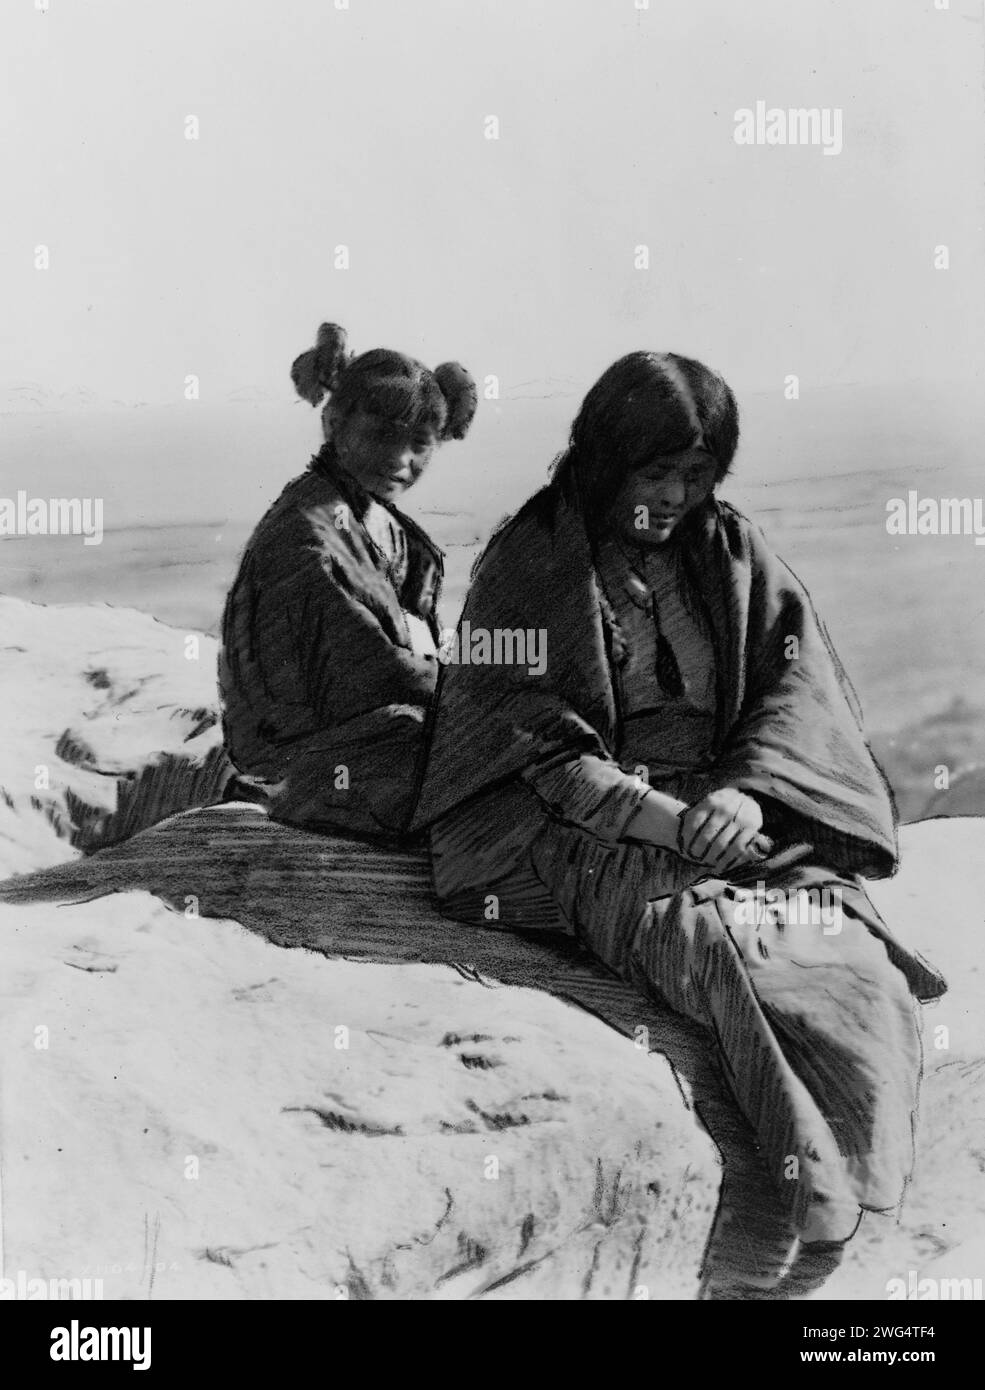 Maiden and Matron, c1905. Two Hopi females sitting on a rock. Stock Photo